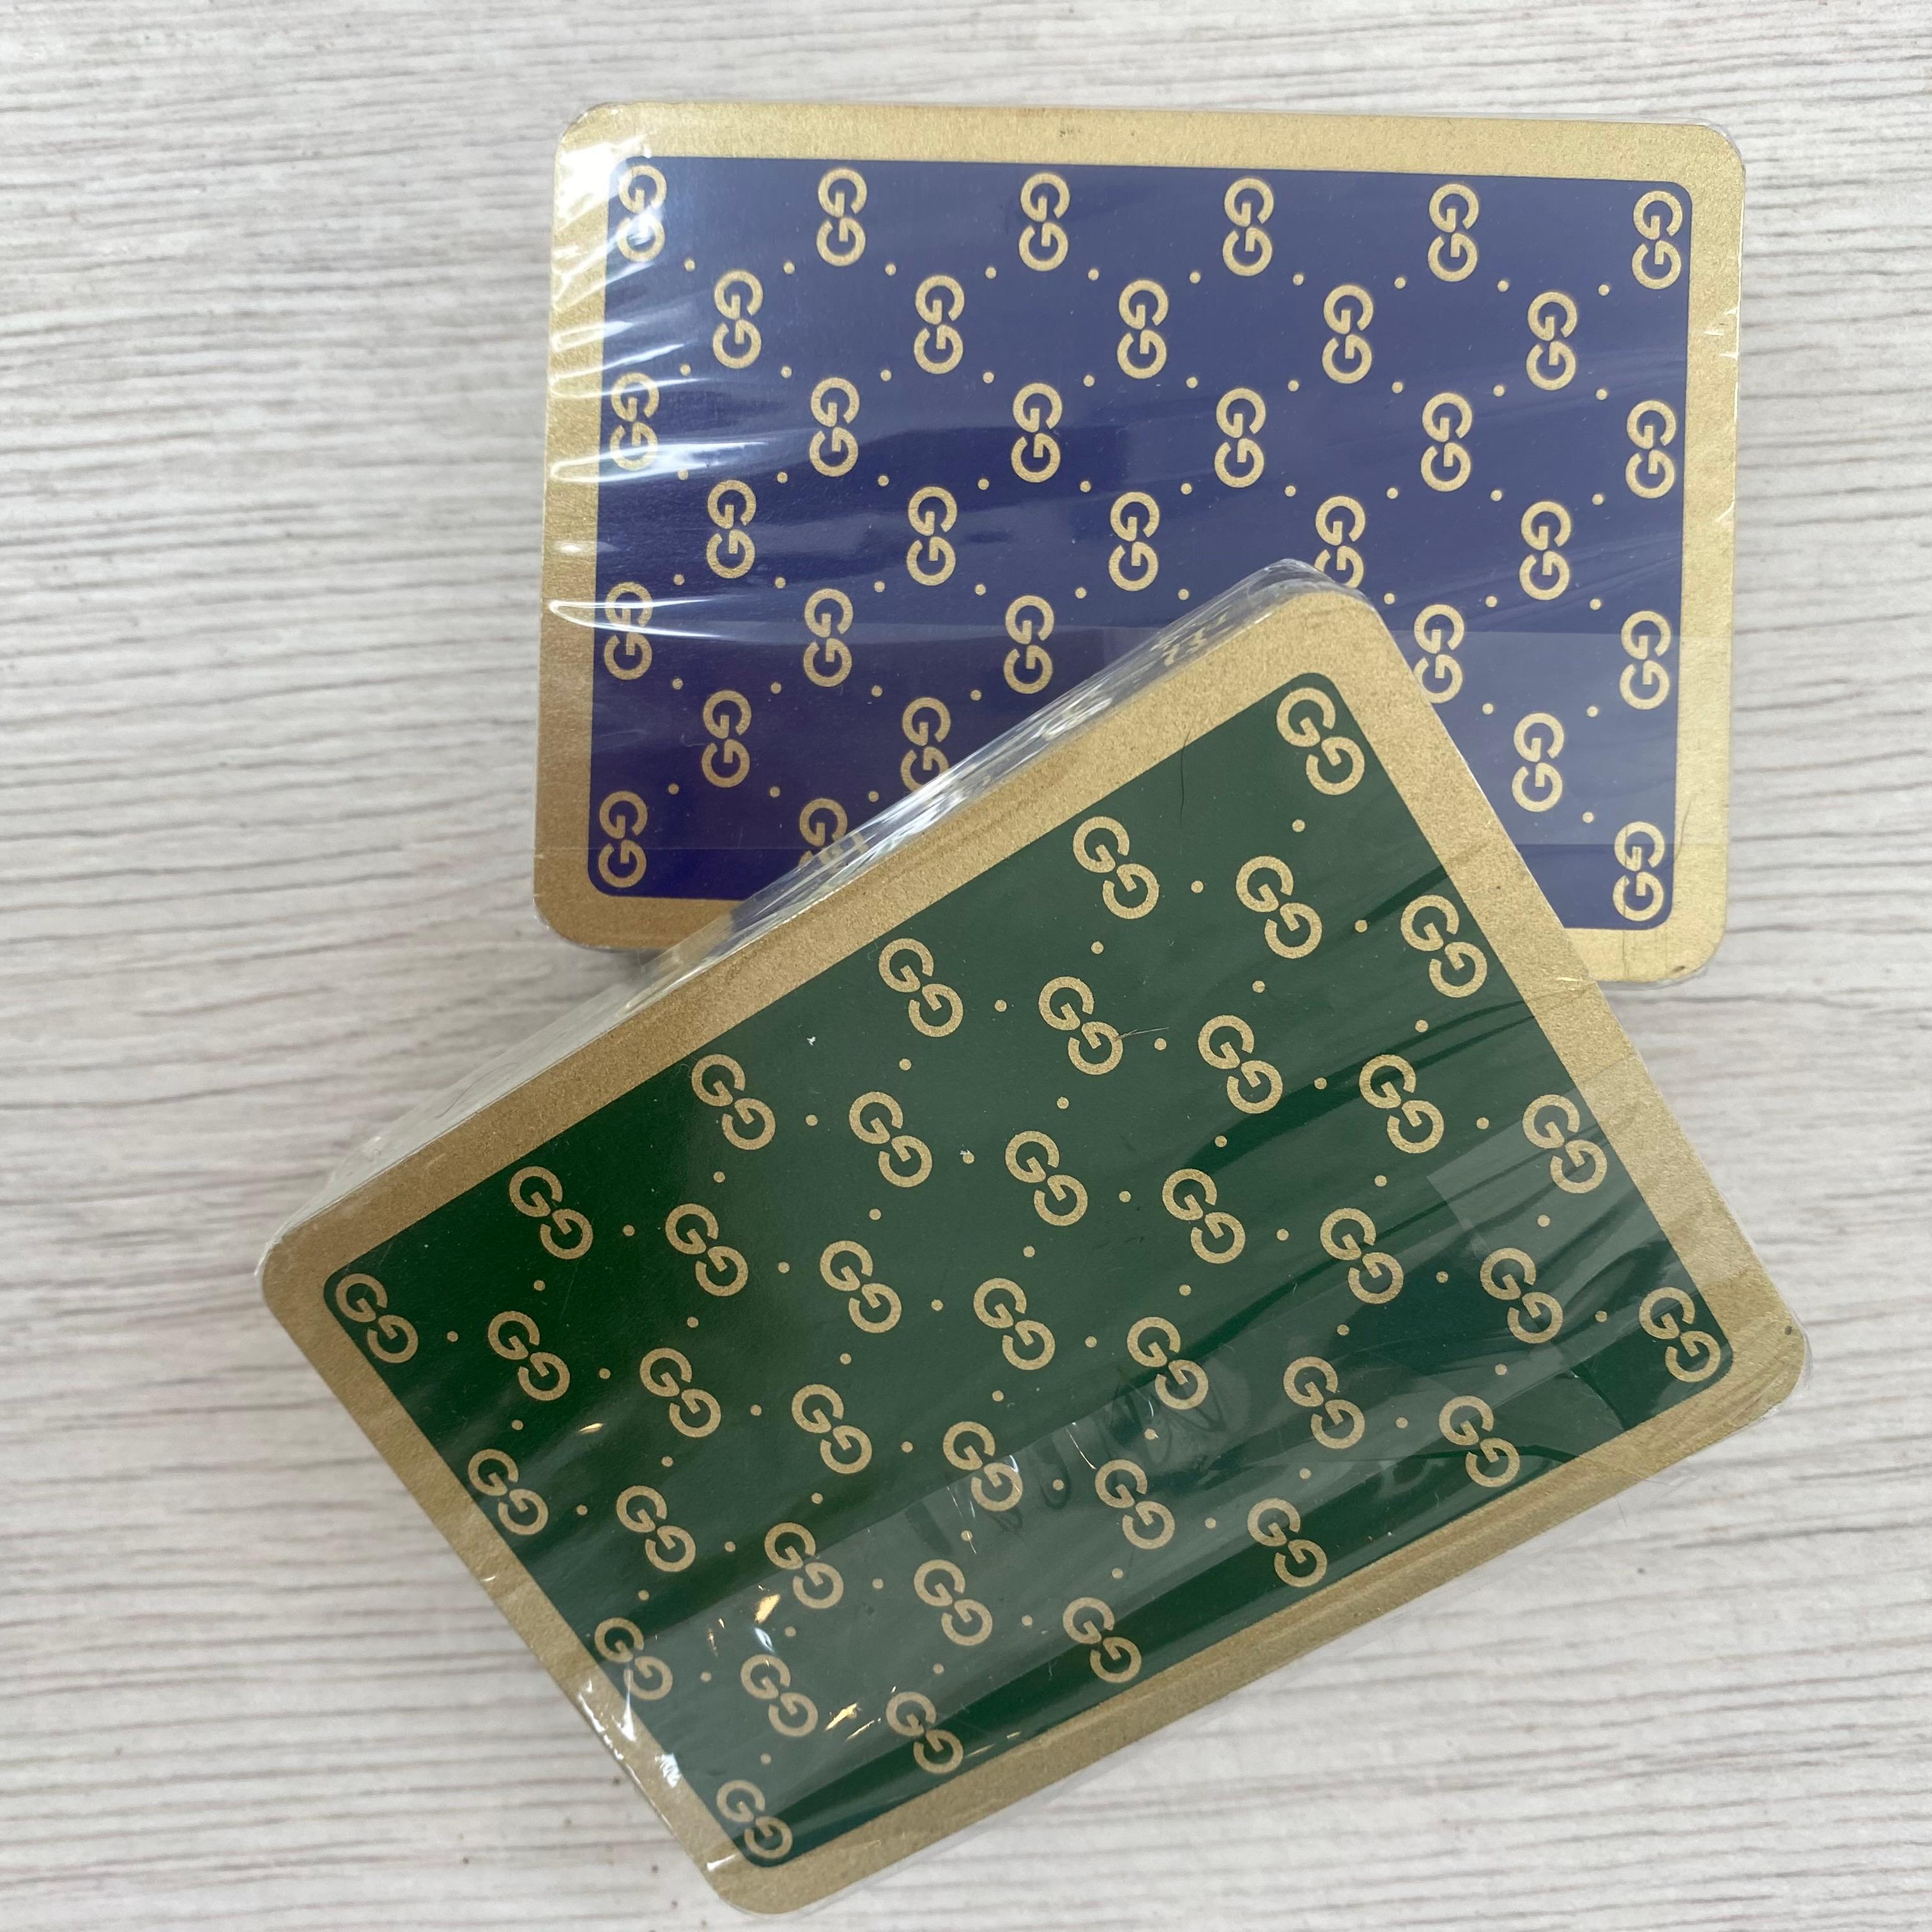 Vintage Gucci Playing Cards, 1980s Italy For Sale 4